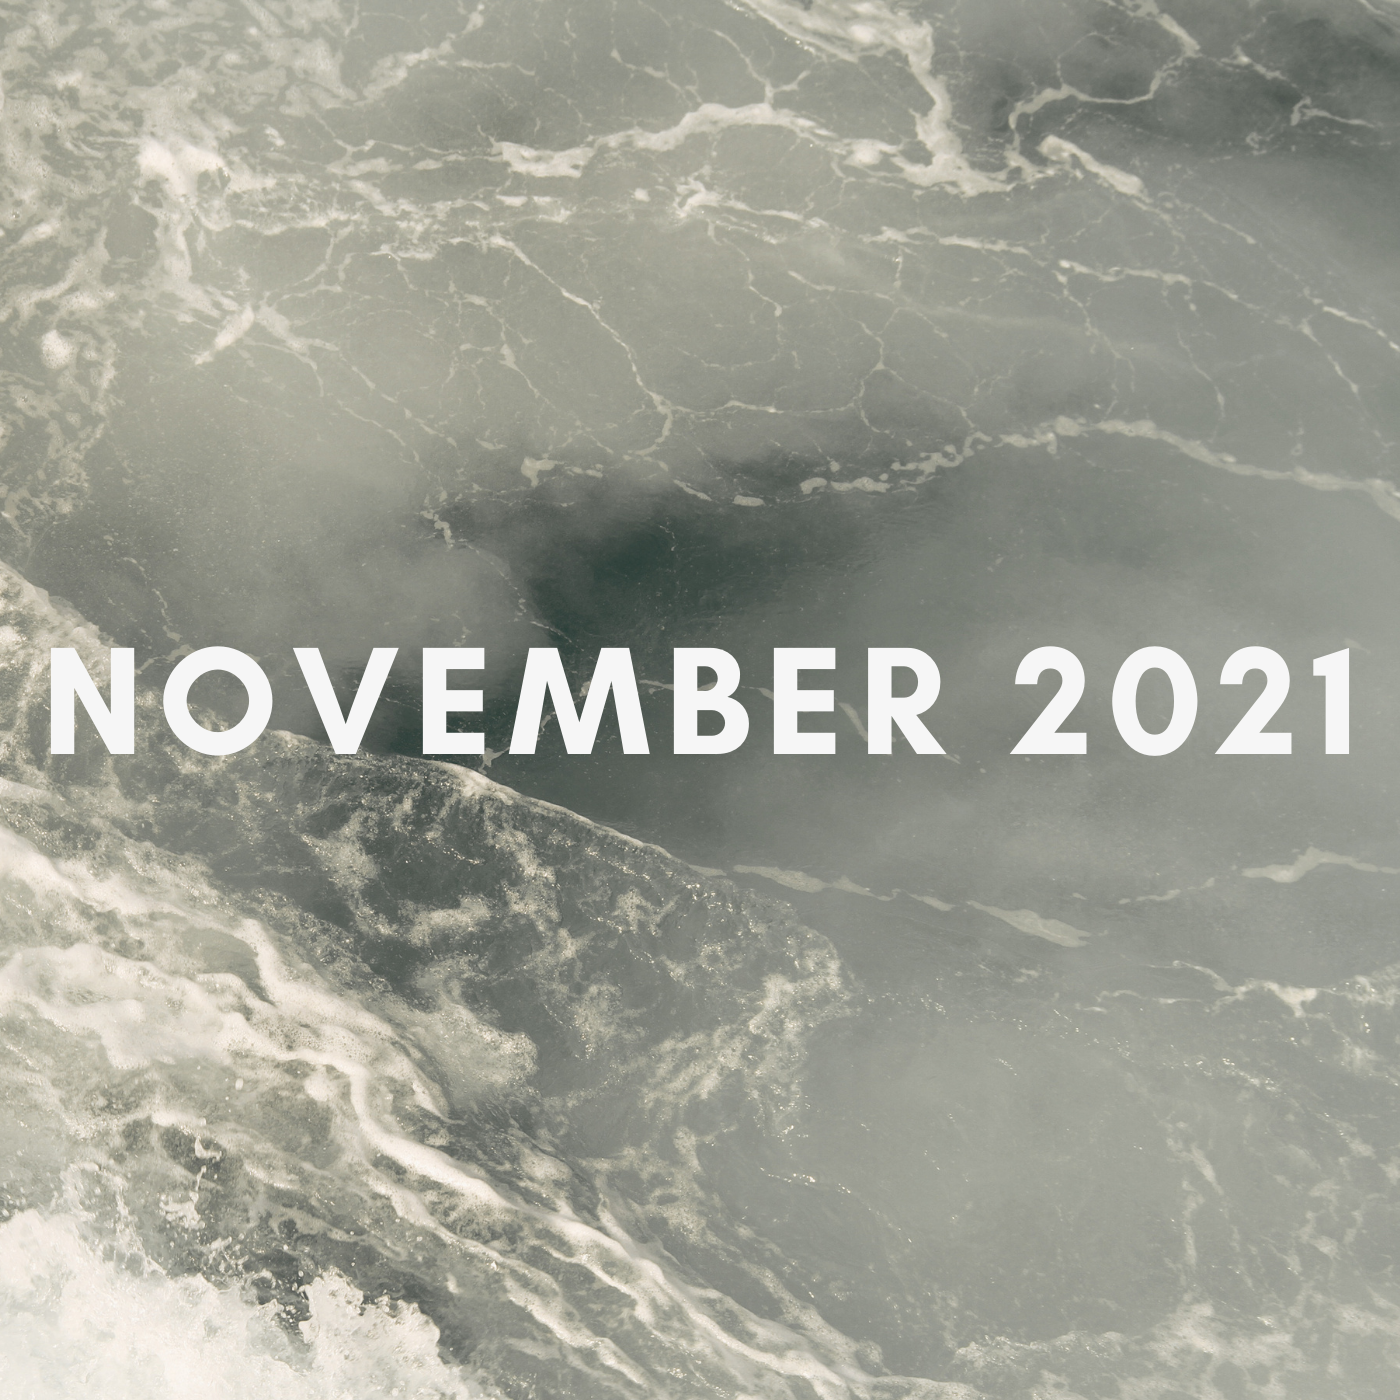 a square black and white image of churning ocean water, it says november 2021 in an all caps sans-serif font at the center